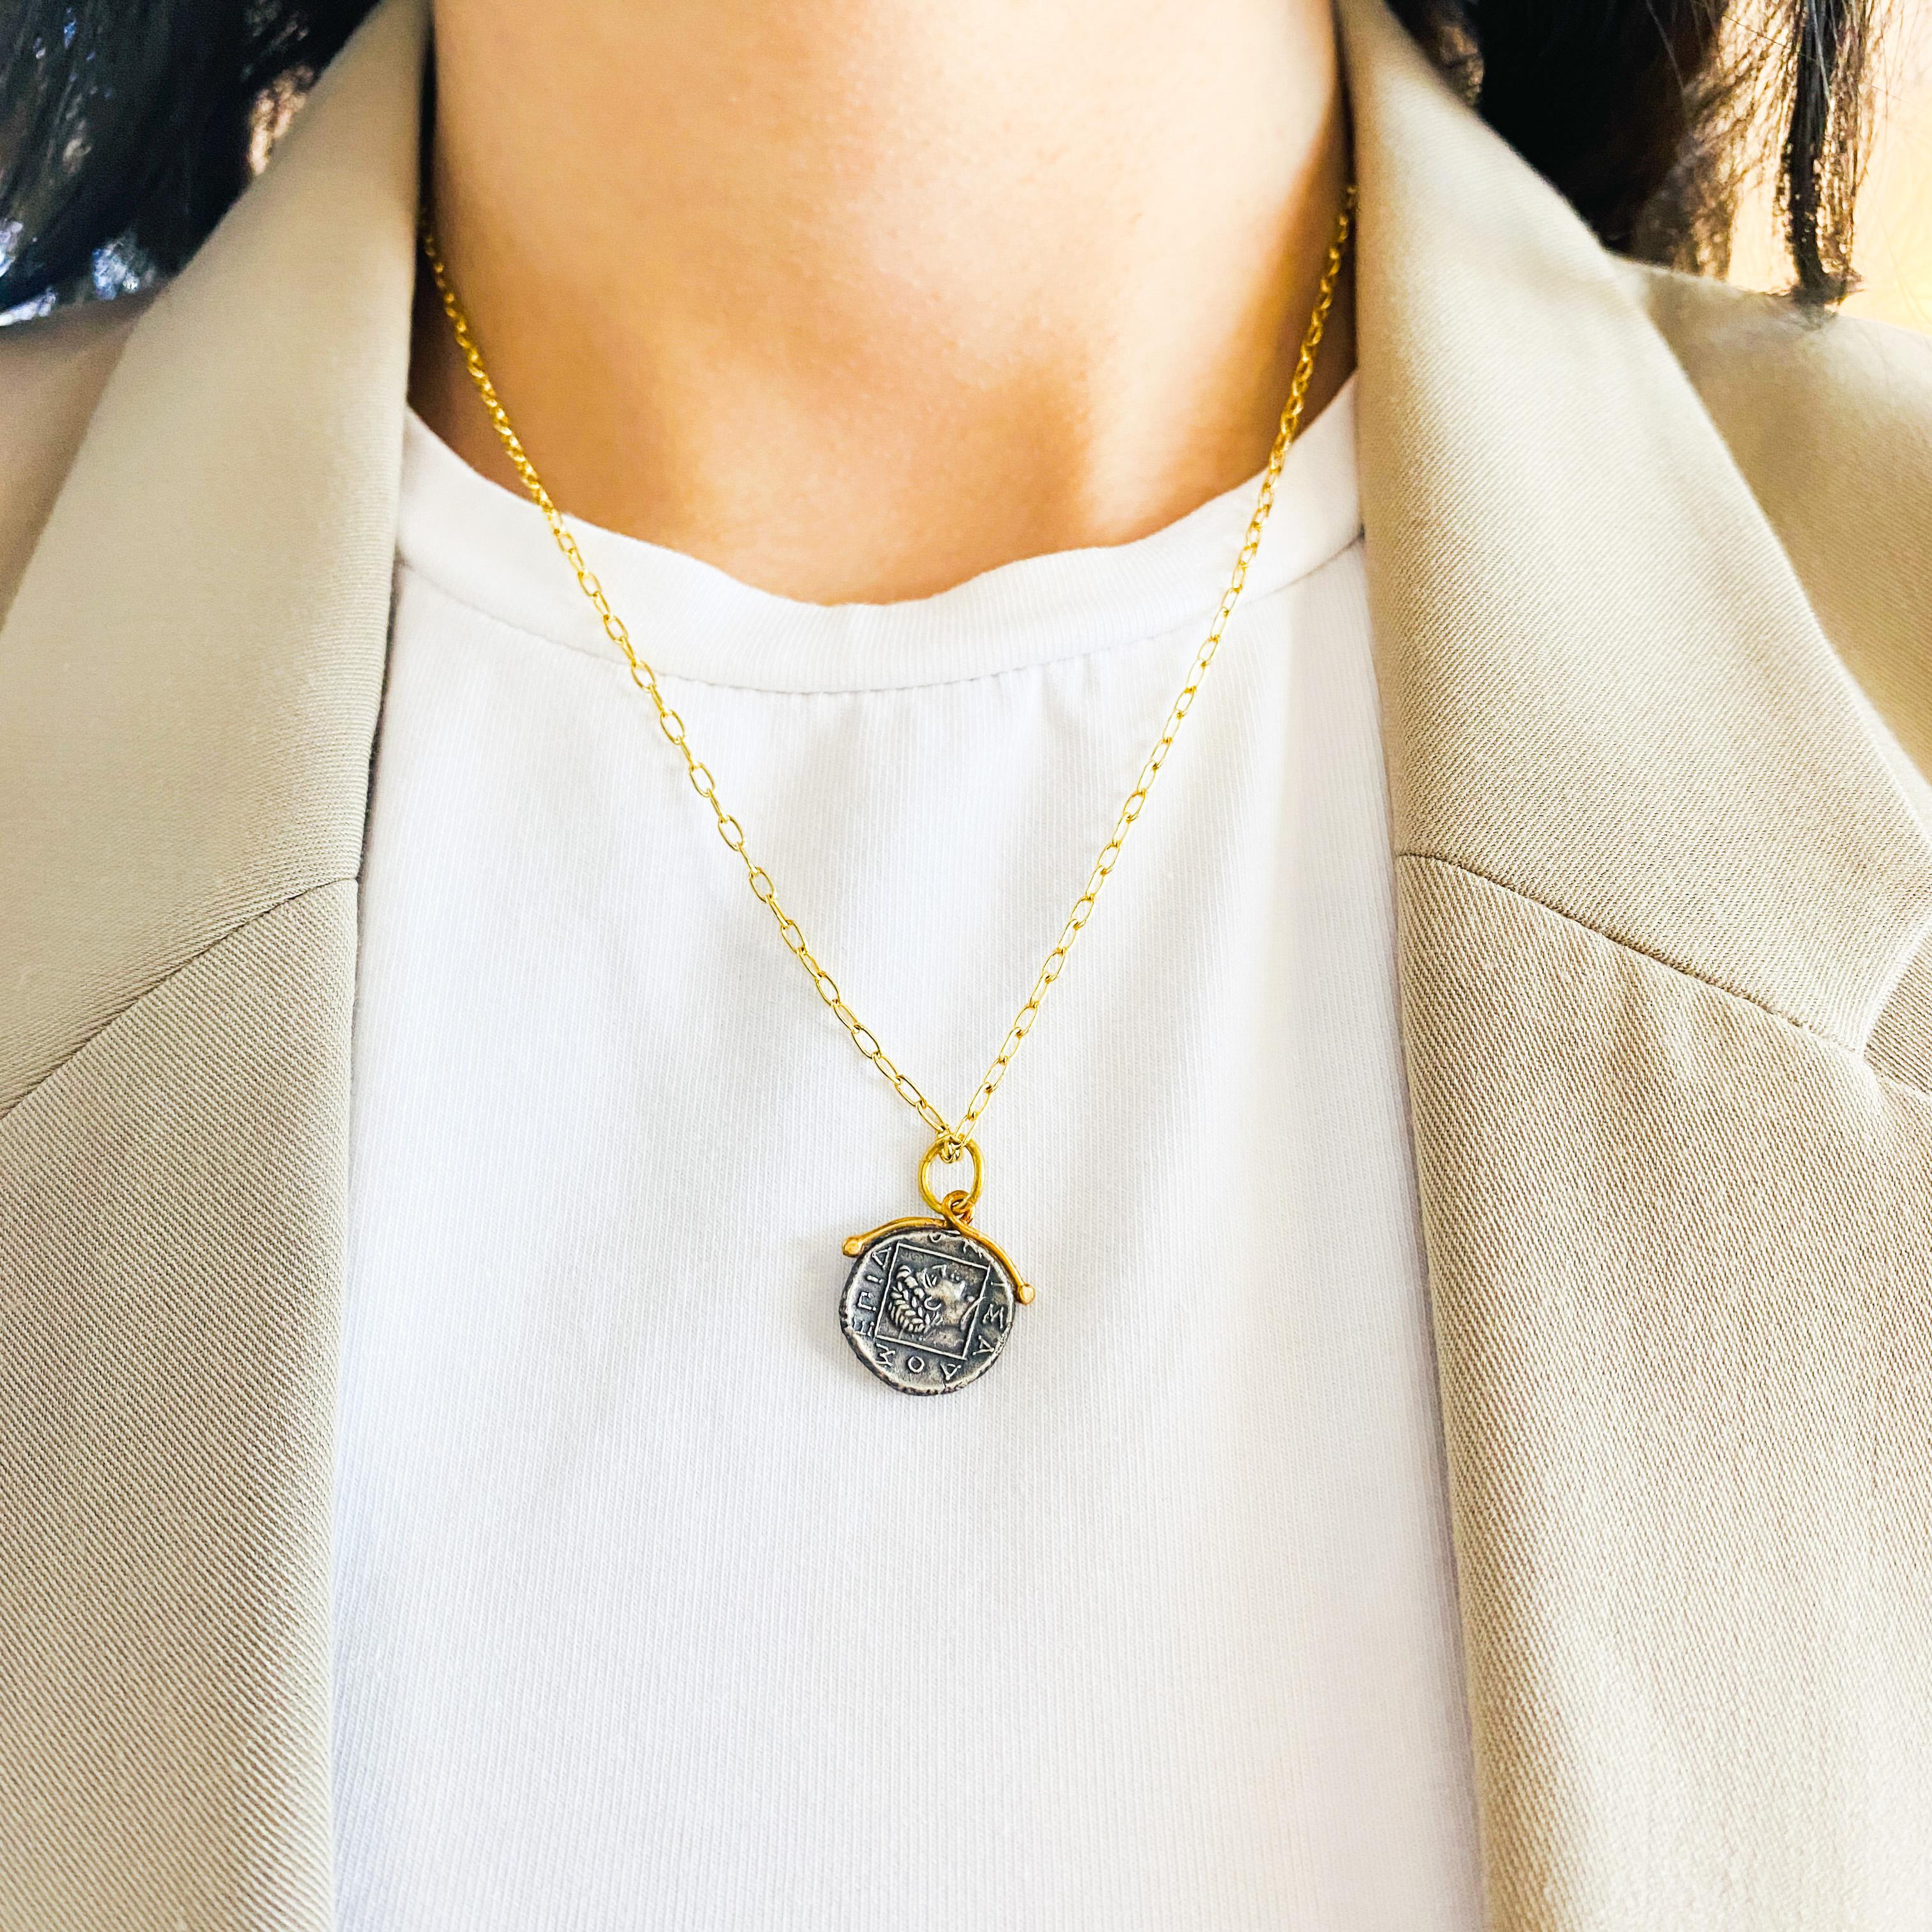 janus coin necklace